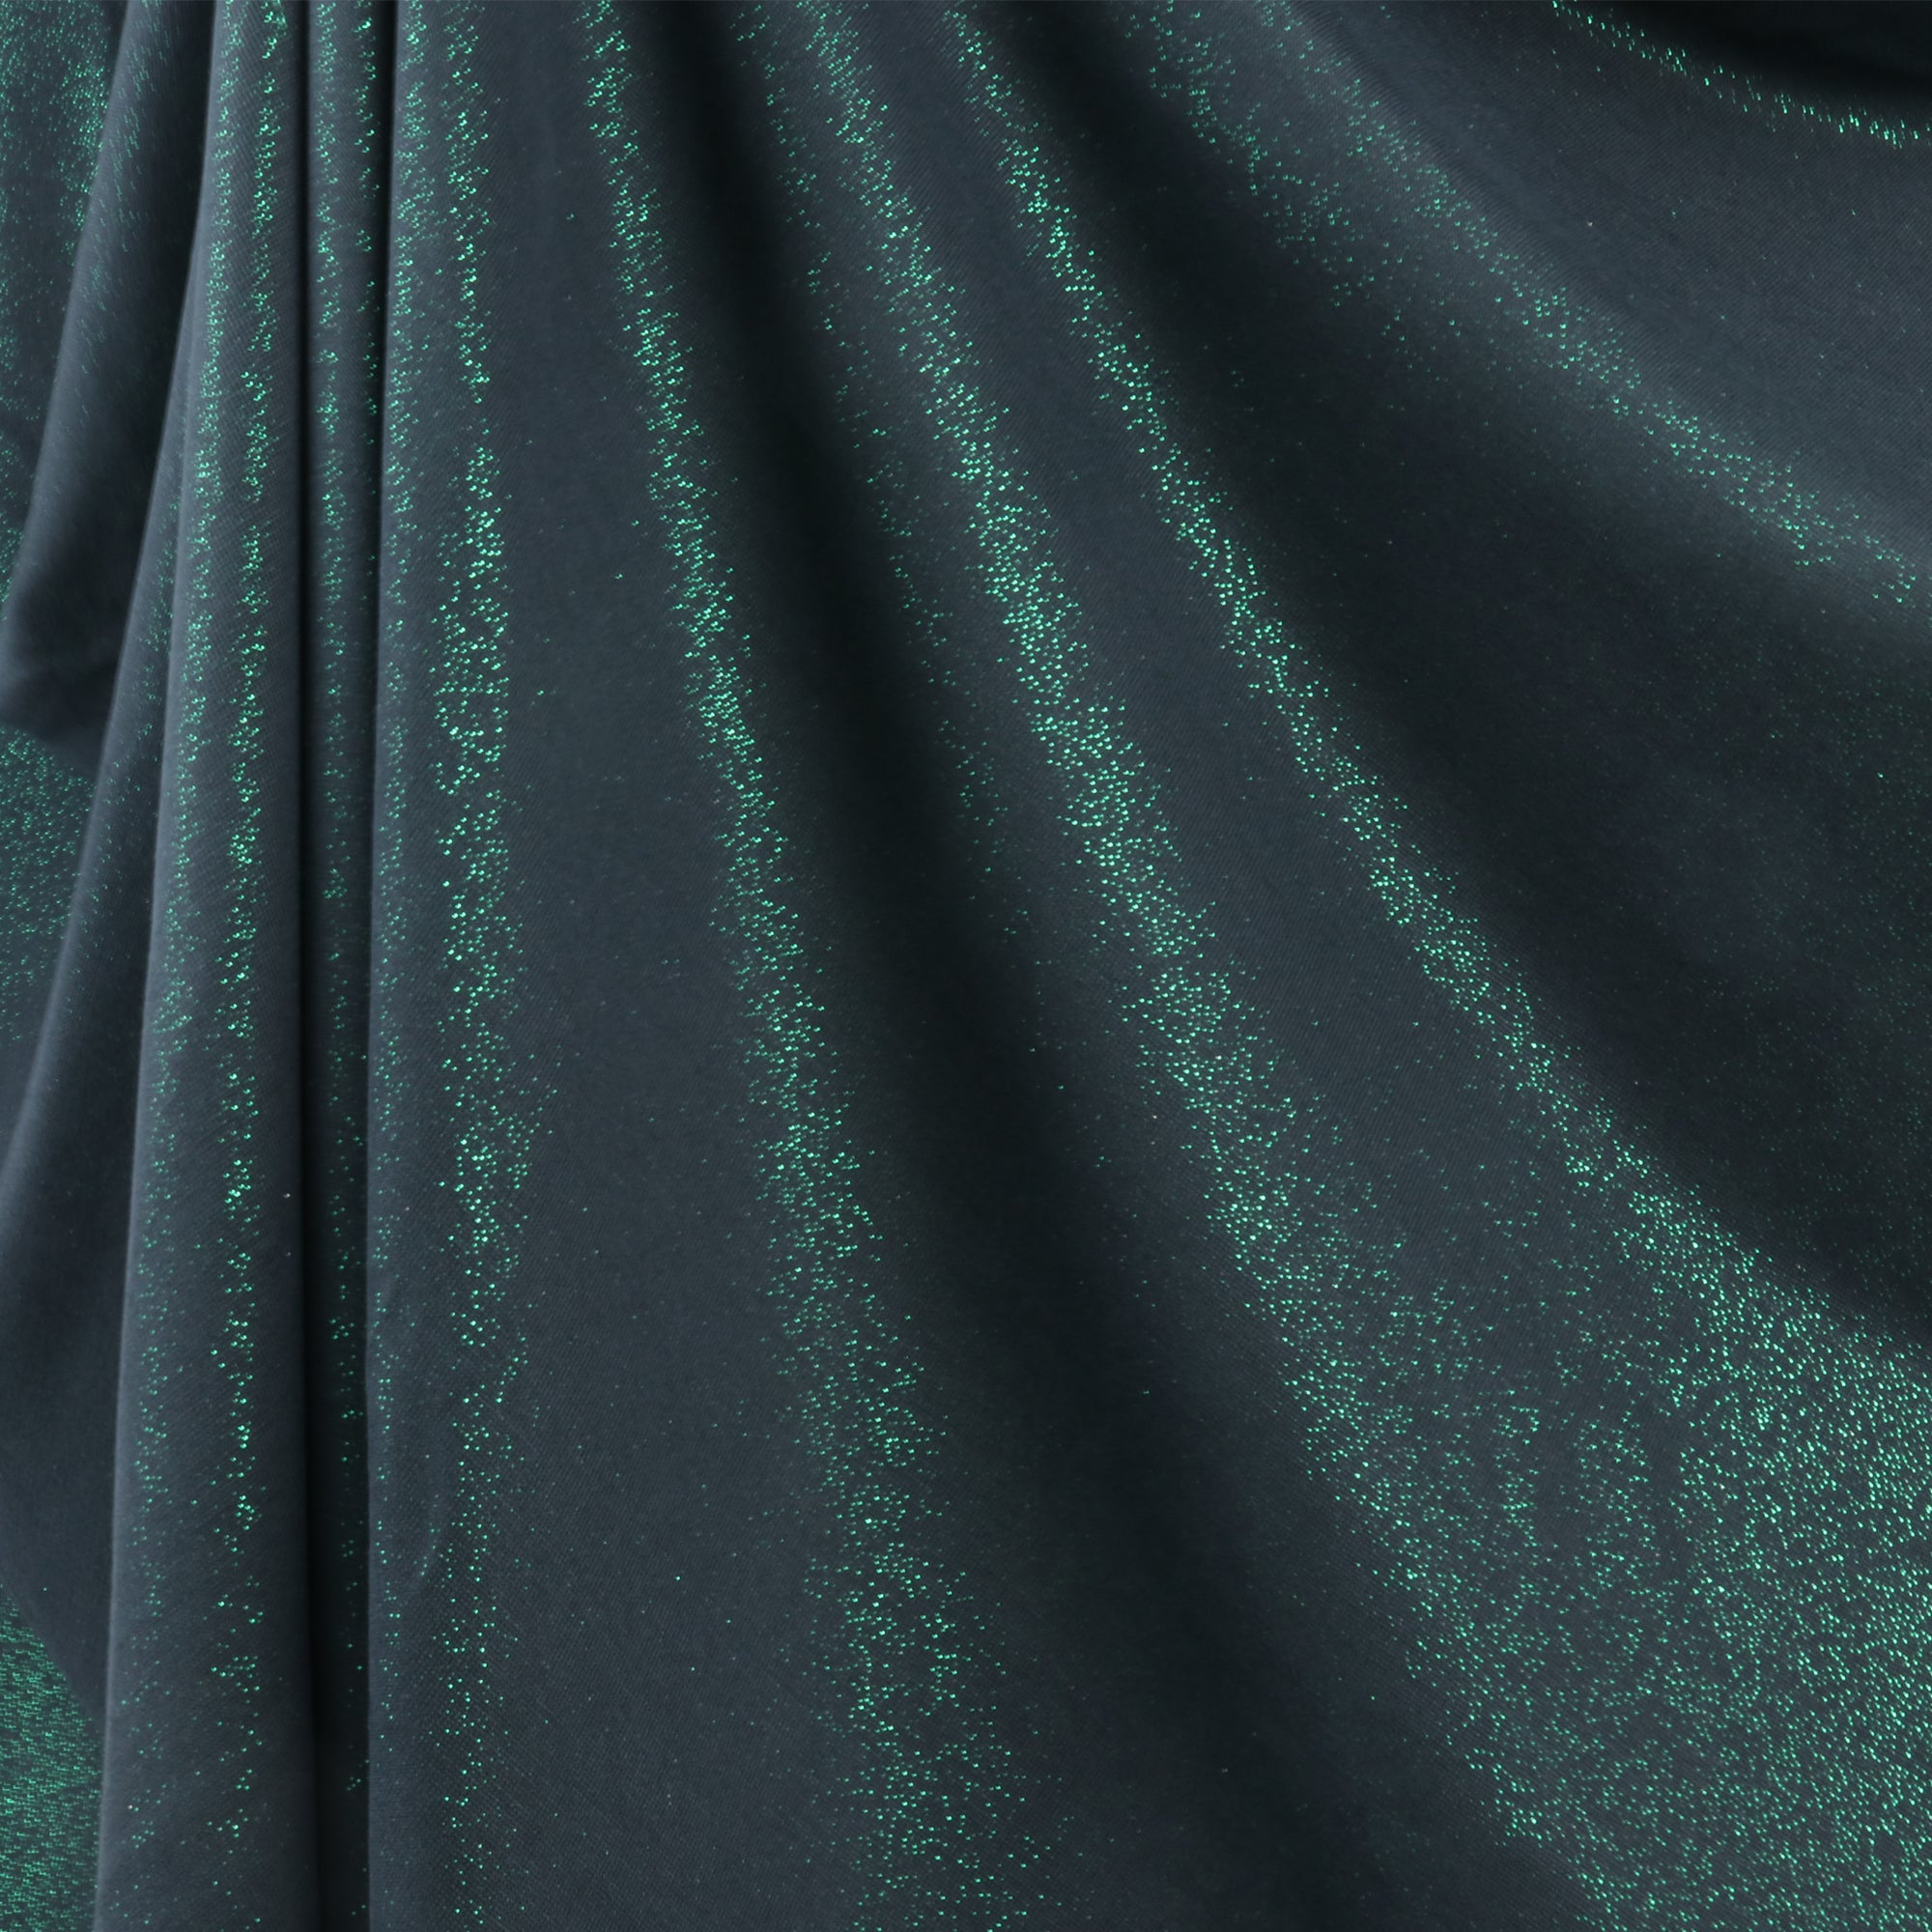 Micro Modal Spandex Fabric Jersey Knit by the Yard EMERALD GREEN